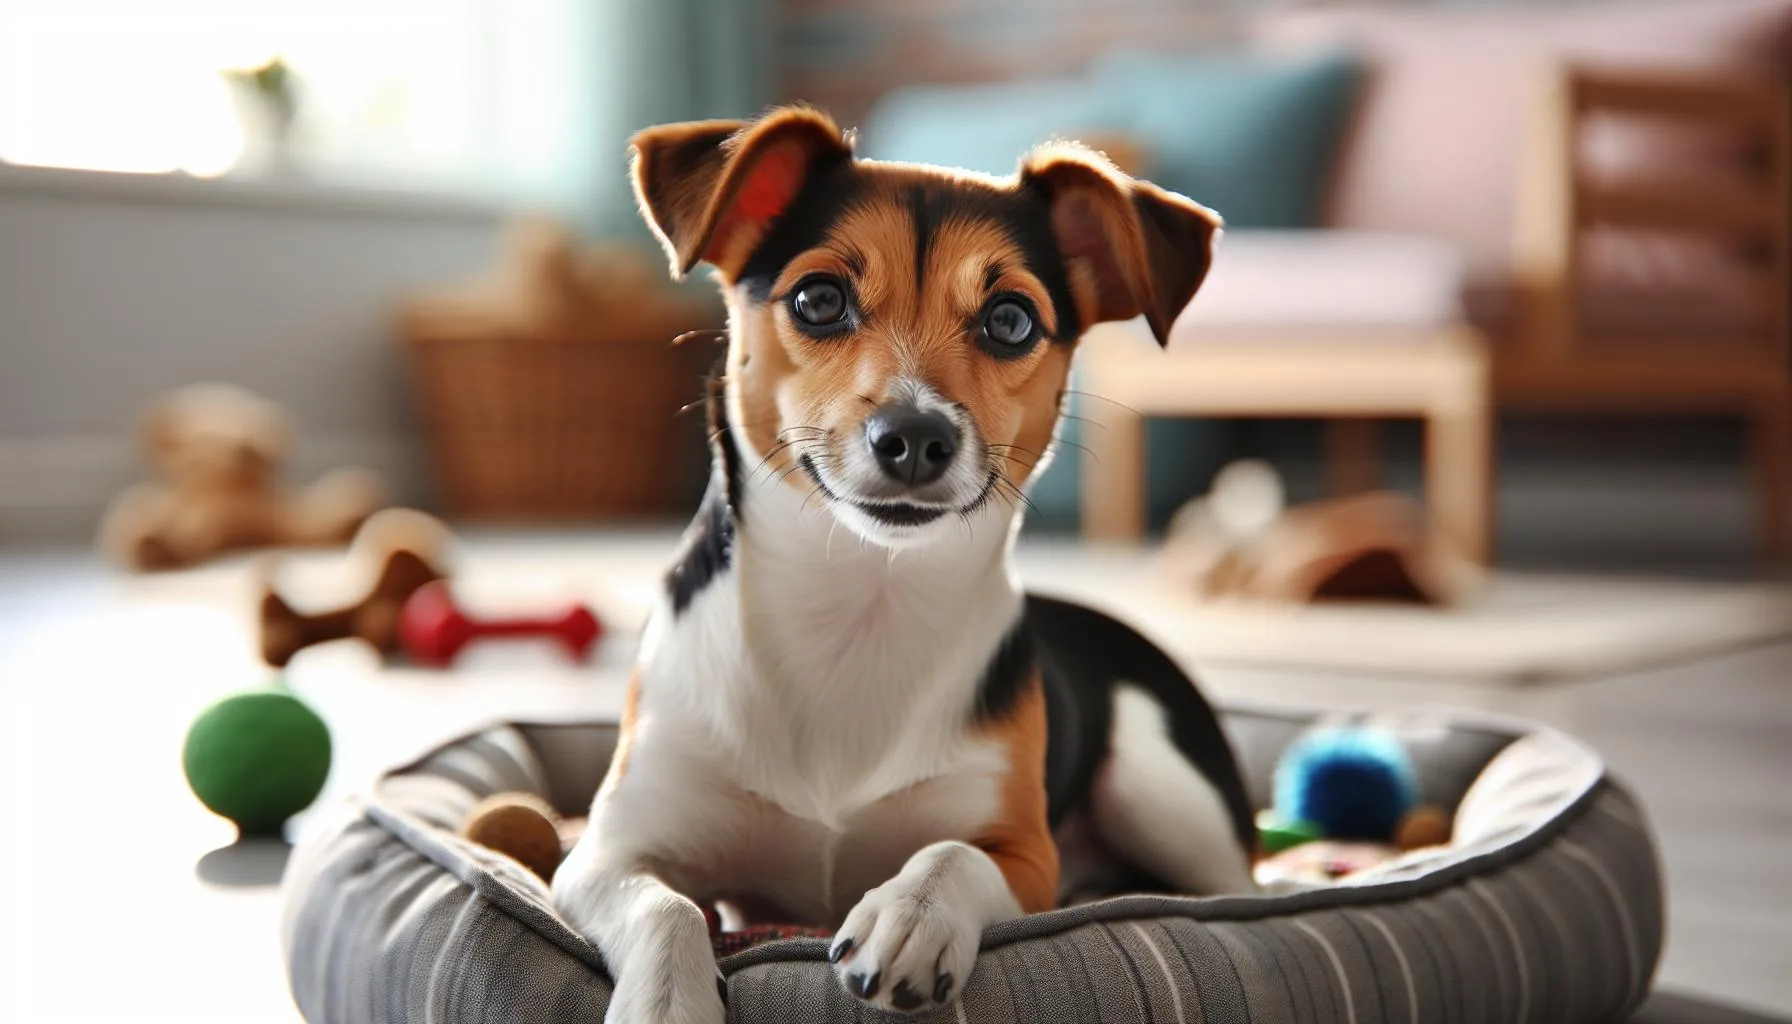 Jack Russell Chihuahua Mix: Adopt Now!